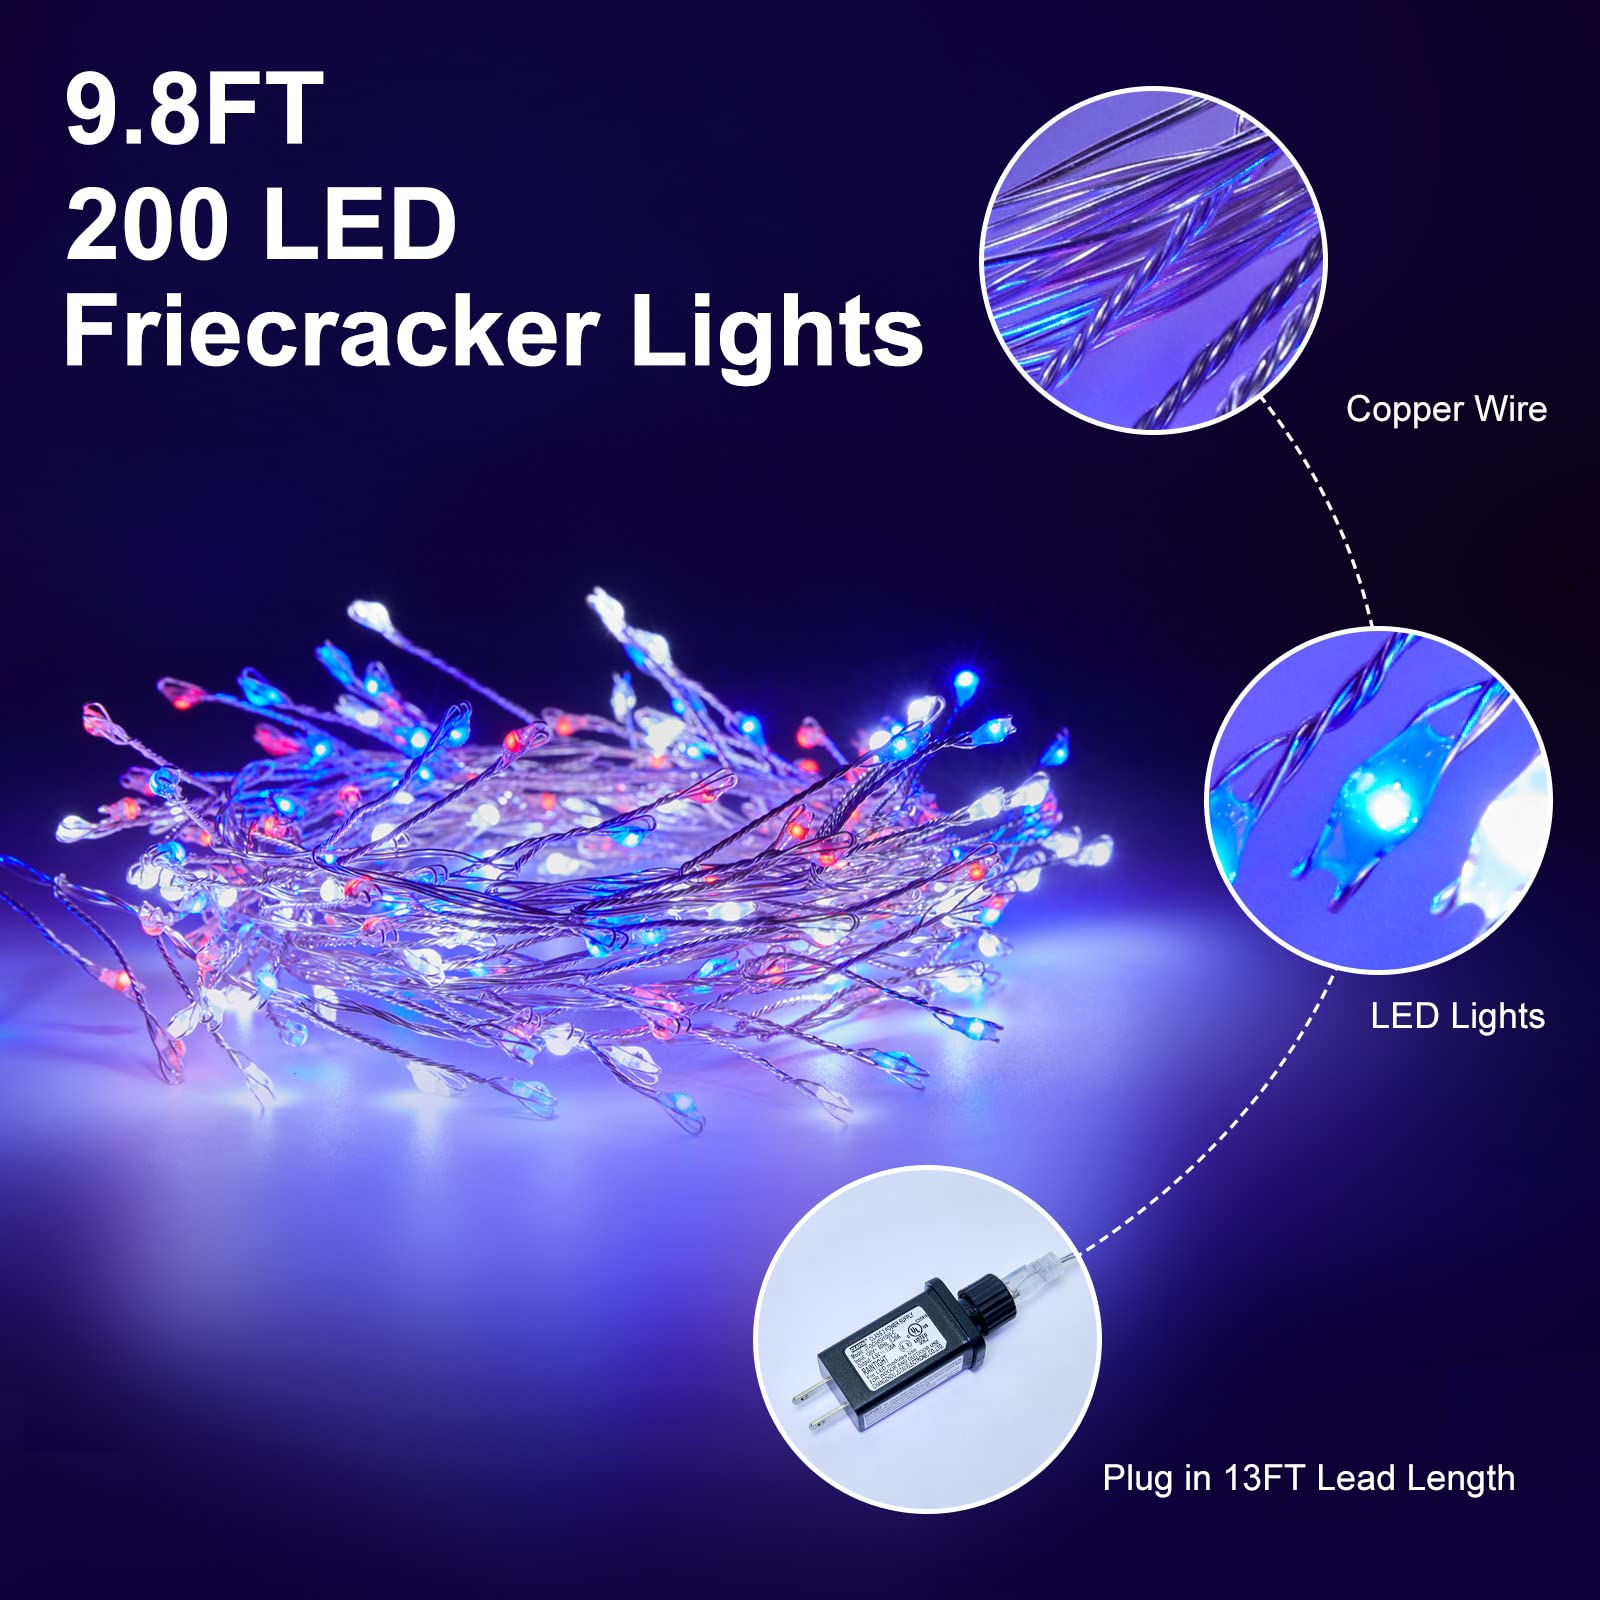 1 x 10 Feet / 200 LED / Red White Blue / Silver Wire